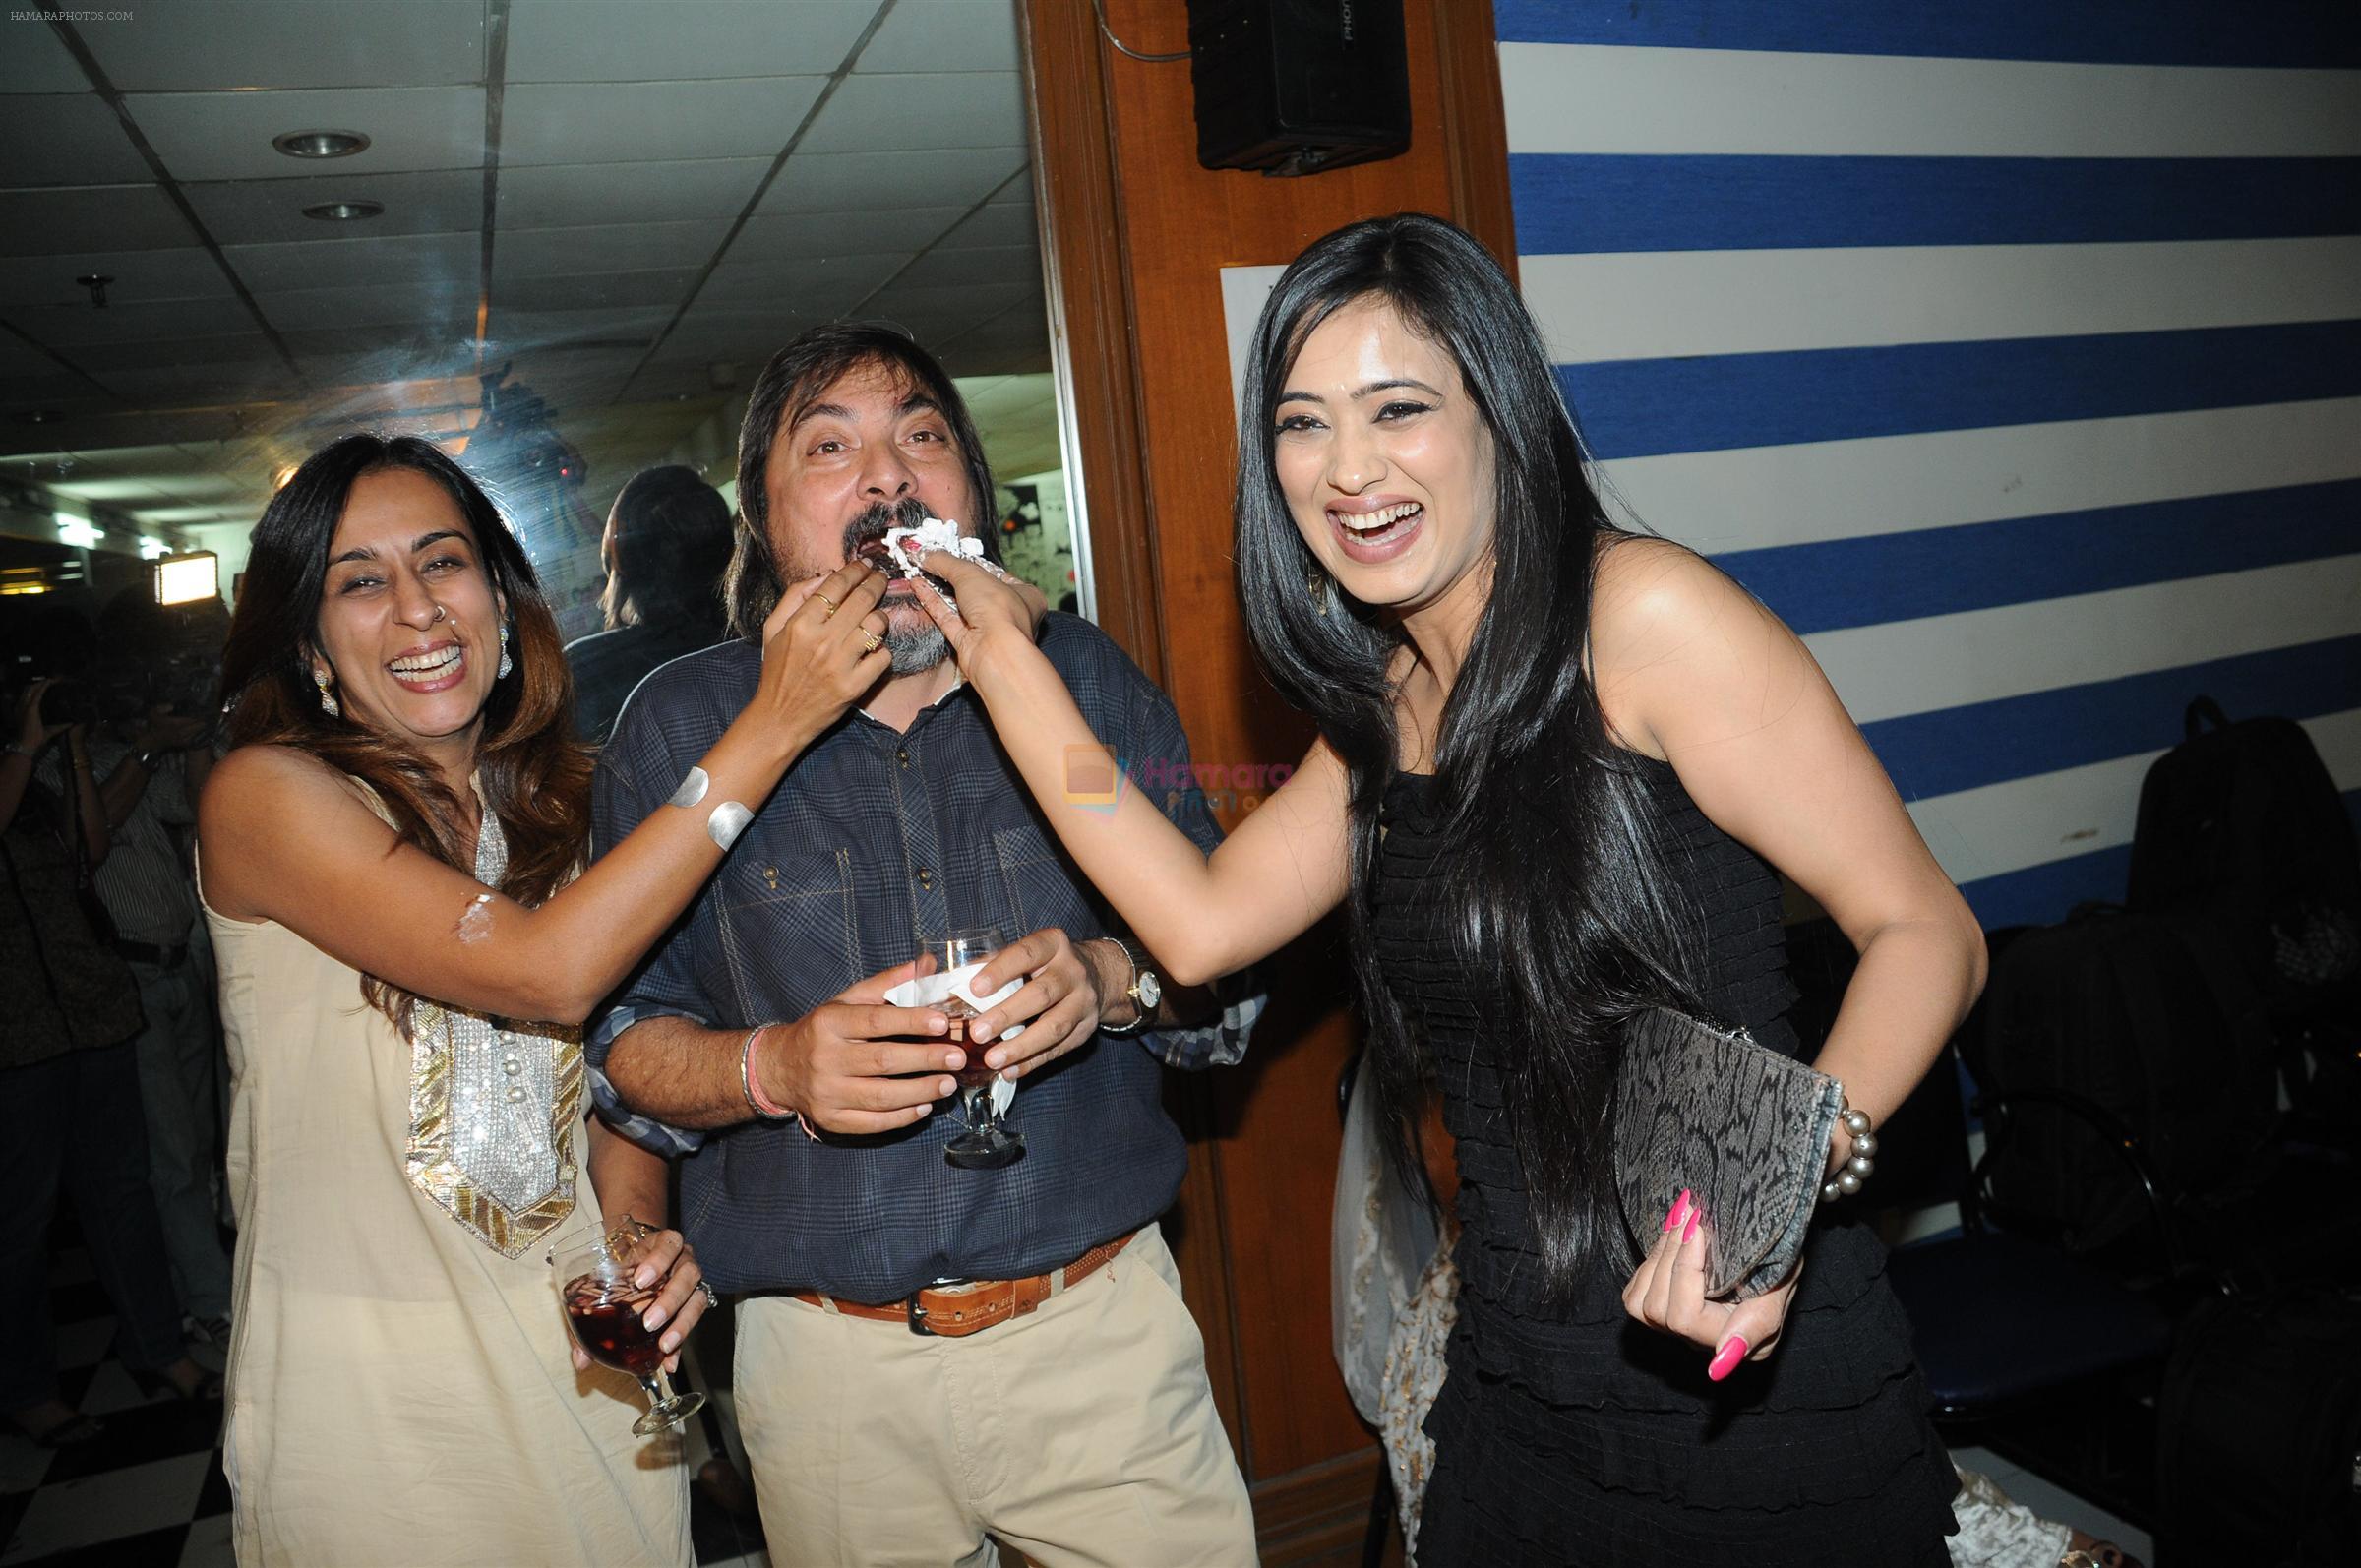 Deeya and Tony singh with Shweta Tewari at the Celebration of the Completion Party of 100 Episodes of PARVARISH kuch khatti kuch meethi in bowling alley on 7th April 2012